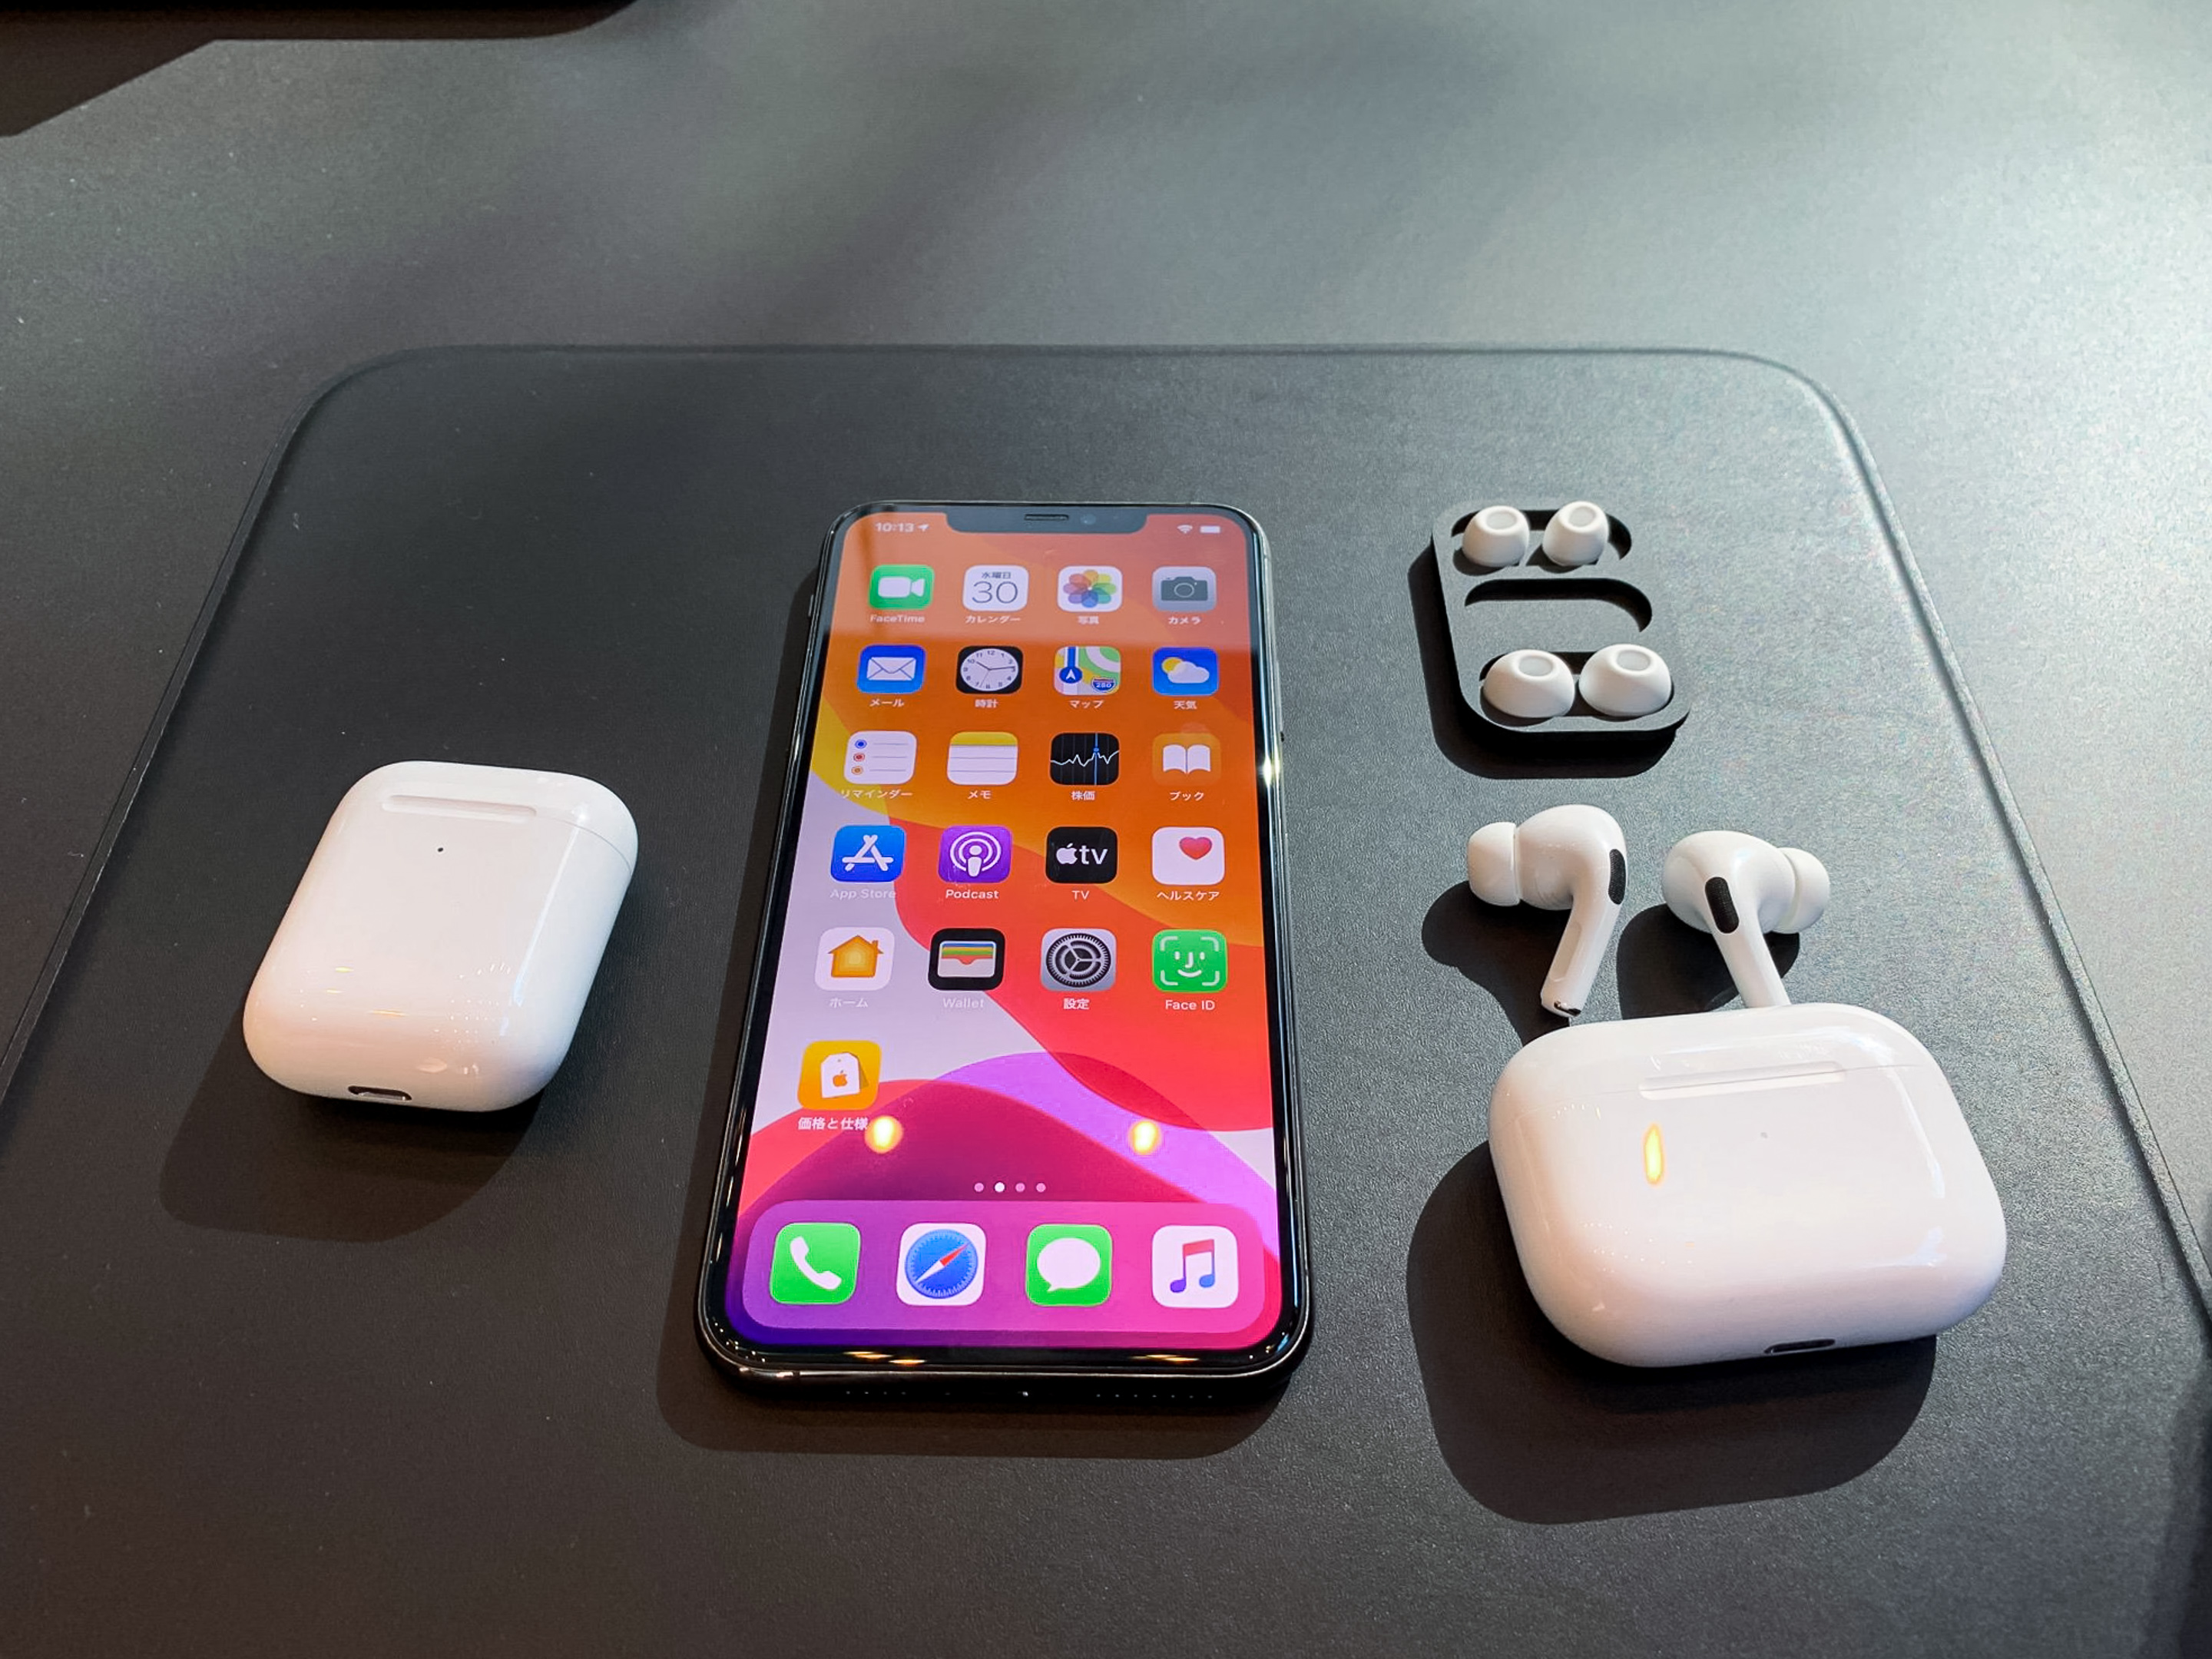 Airpods 13. Iphone AIRPODS 3 Pro. Iphone 11 с AIRPODS Pro. Apple AIRPODS Pro 2 Apple. Iphone 13 Pro AIRPODS Pro.